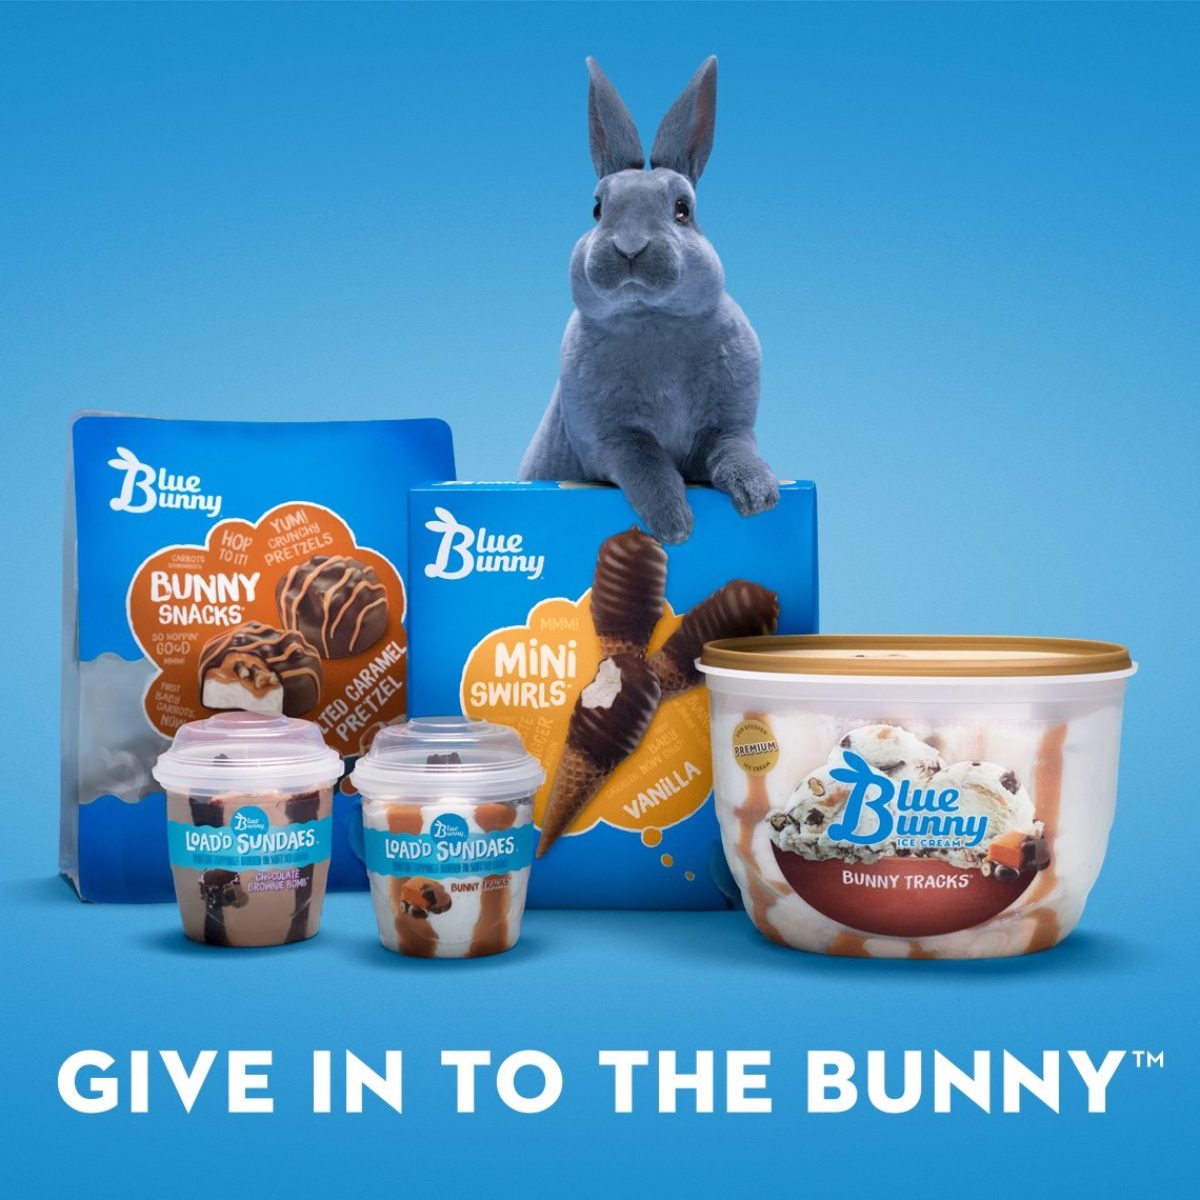 <p class=""><strong><a class="SWhtmlLink" href="https://www.bluebunny.com" rel="noopener">Blue Bunny Ice Cream</a>, LeMars</strong></p> <p>Blue Bunny Ice Cream put the small town of LeMars, Iowa, on the map. It may only have a population of 10,000 people, but they make more ice cream than anywhere in the world. That makes it the Ice Cream Capital of the World!</p>